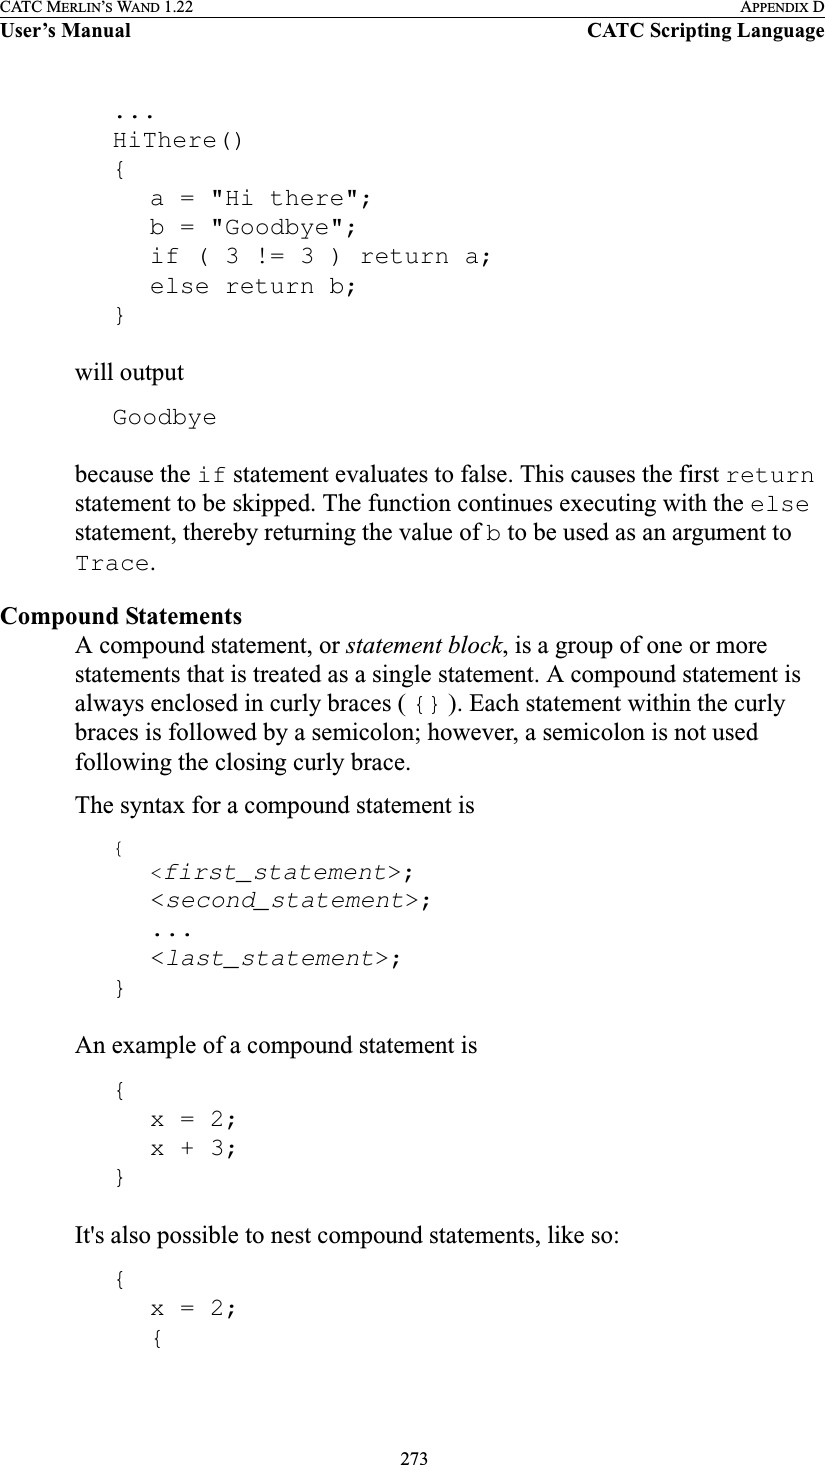  273CATC MERLIN’S WAND 1.22 APPENDIX DUser’s Manual CATC Scripting Language...HiThere(){a = &quot;Hi there&quot;;b = &quot;Goodbye&quot;;if ( 3 != 3 ) return a;else return b;}will outputGoodbyebecause the if statement evaluates to false. This causes the first return statement to be skipped. The function continues executing with the else statement, thereby returning the value of b to be used as an argument to Trace.Compound StatementsA compound statement, or statement block, is a group of one or more statements that is treated as a single statement. A compound statement is always enclosed in curly braces ( {} ). Each statement within the curly braces is followed by a semicolon; however, a semicolon is not used following the closing curly brace. The syntax for a compound statement is{&lt;first_statement&gt;;&lt;second_statement&gt;;...&lt;last_statement&gt;;}An example of a compound statement is{x = 2;x + 3;}It&apos;s also possible to nest compound statements, like so:{x = 2;{